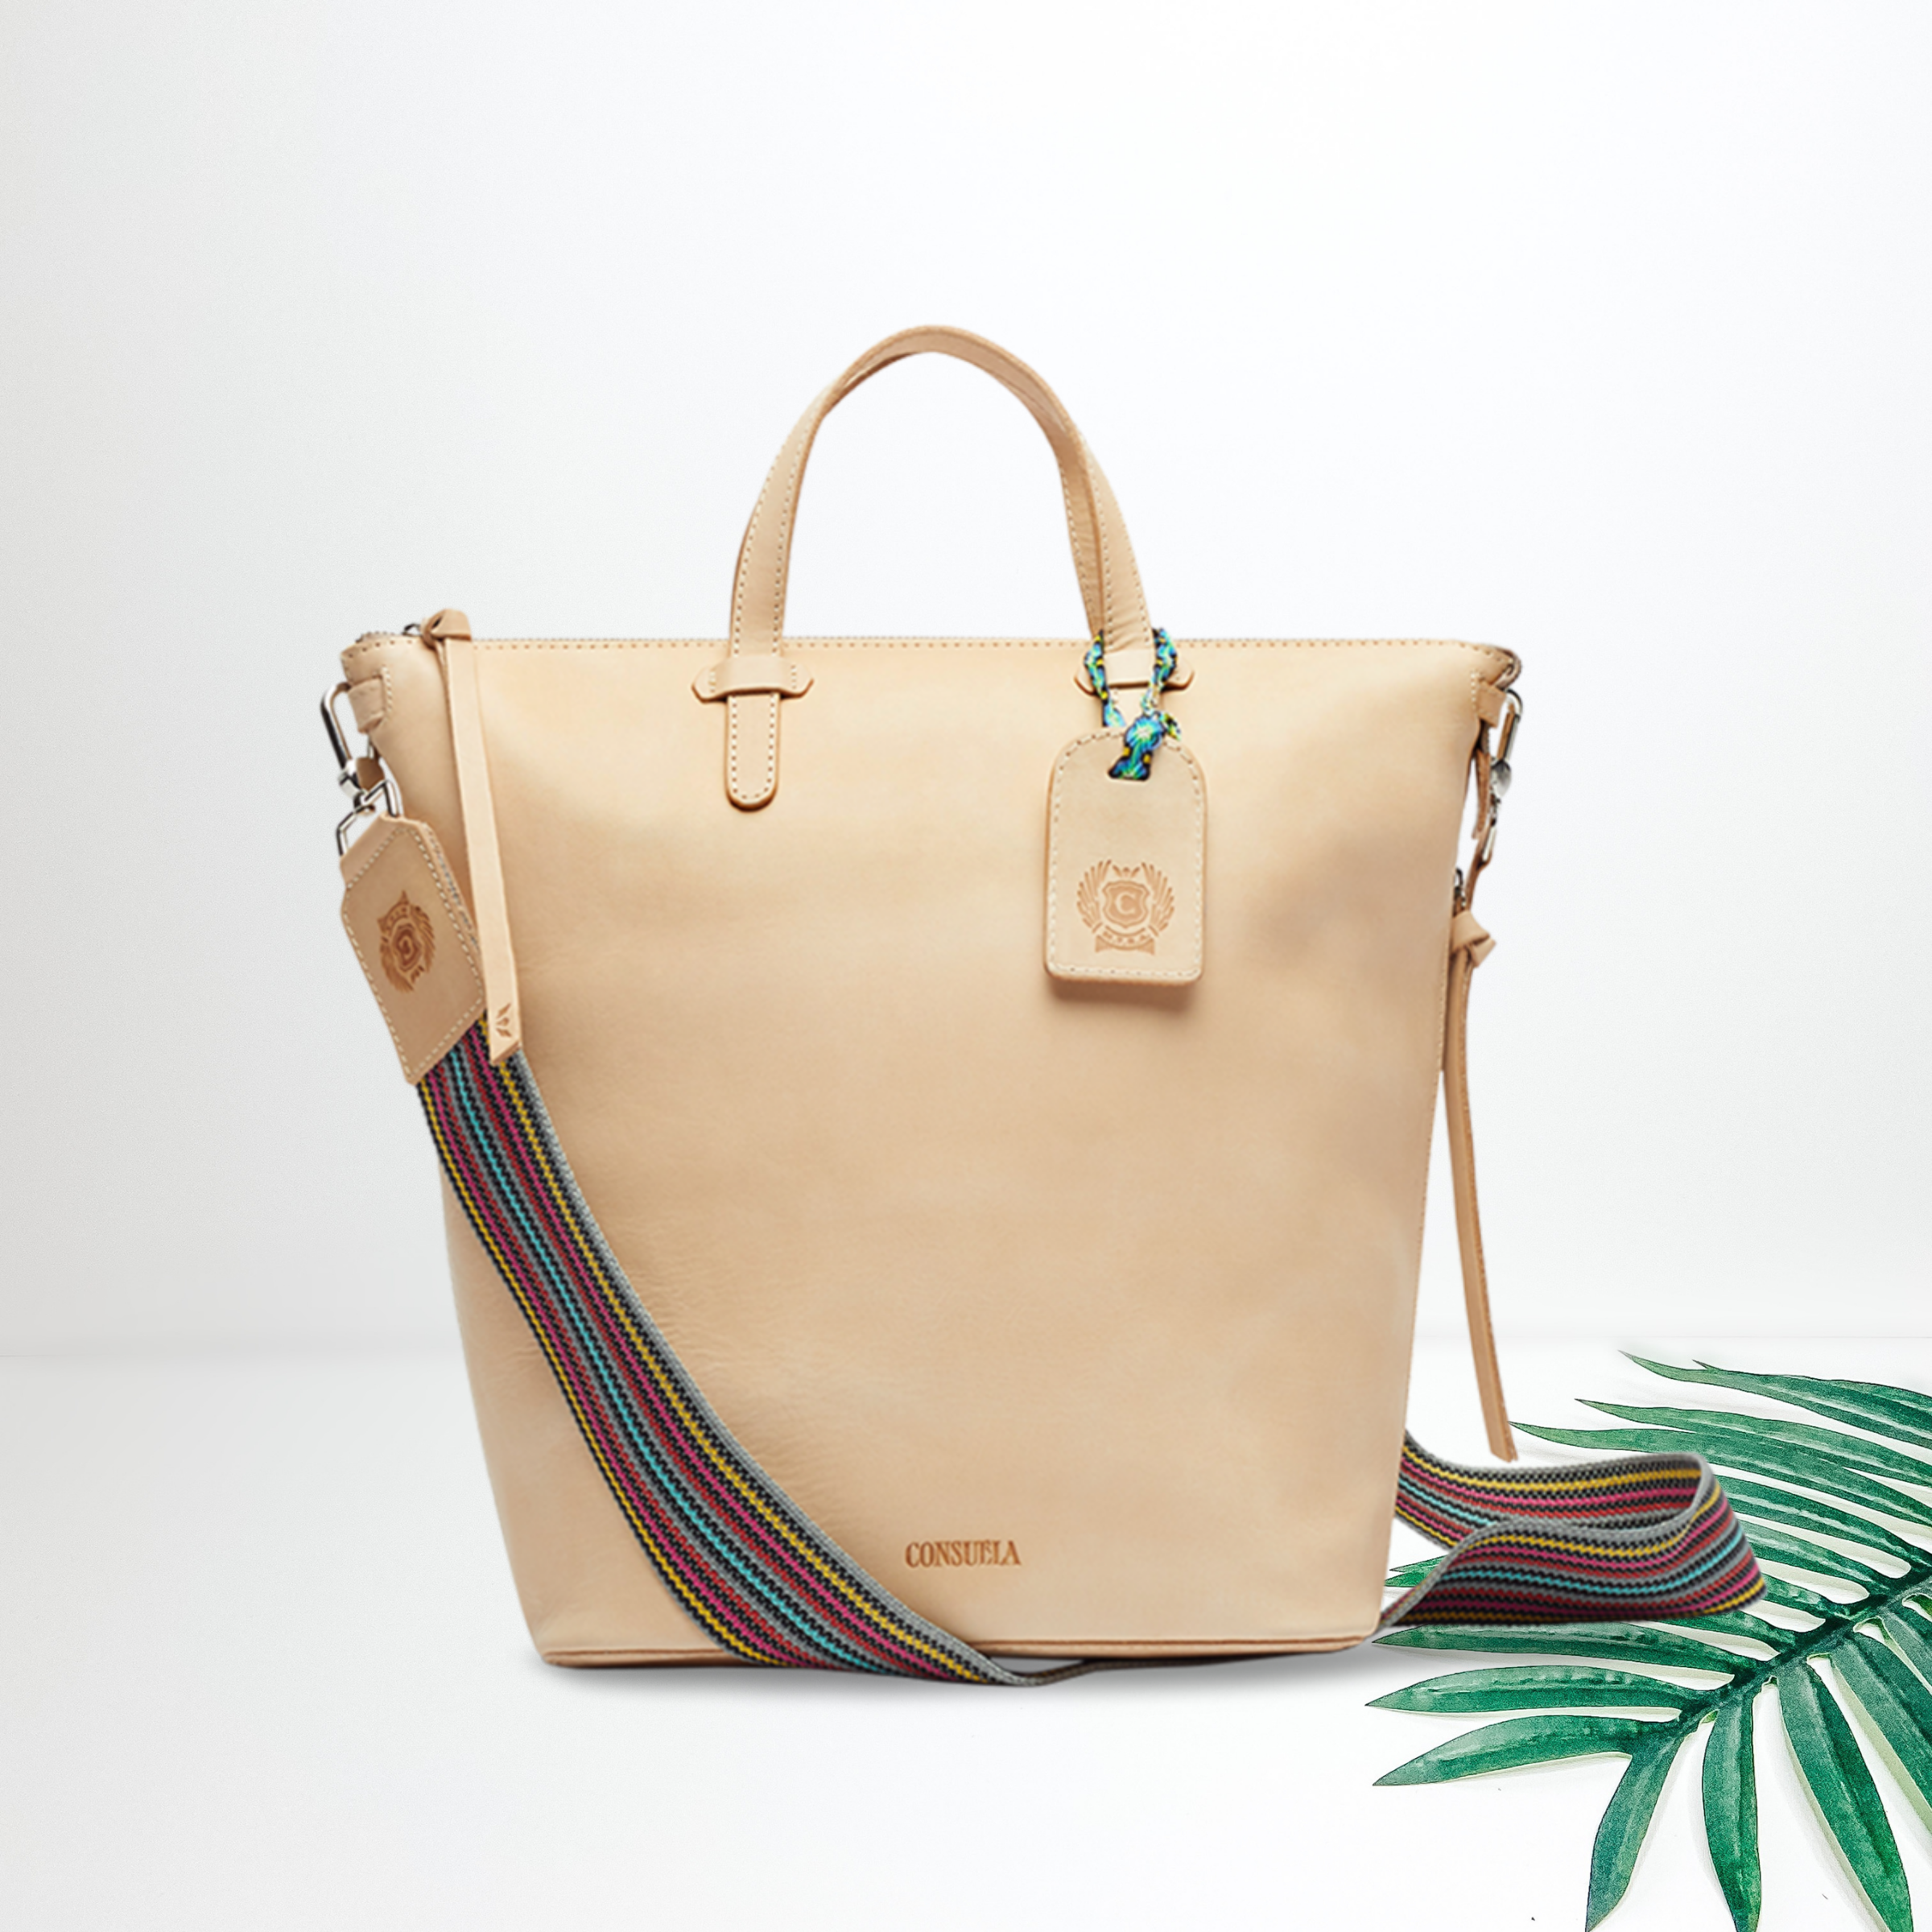 A light tan leather bag with a white a crossbody strap. Pictured on a white background with a palm leaf.